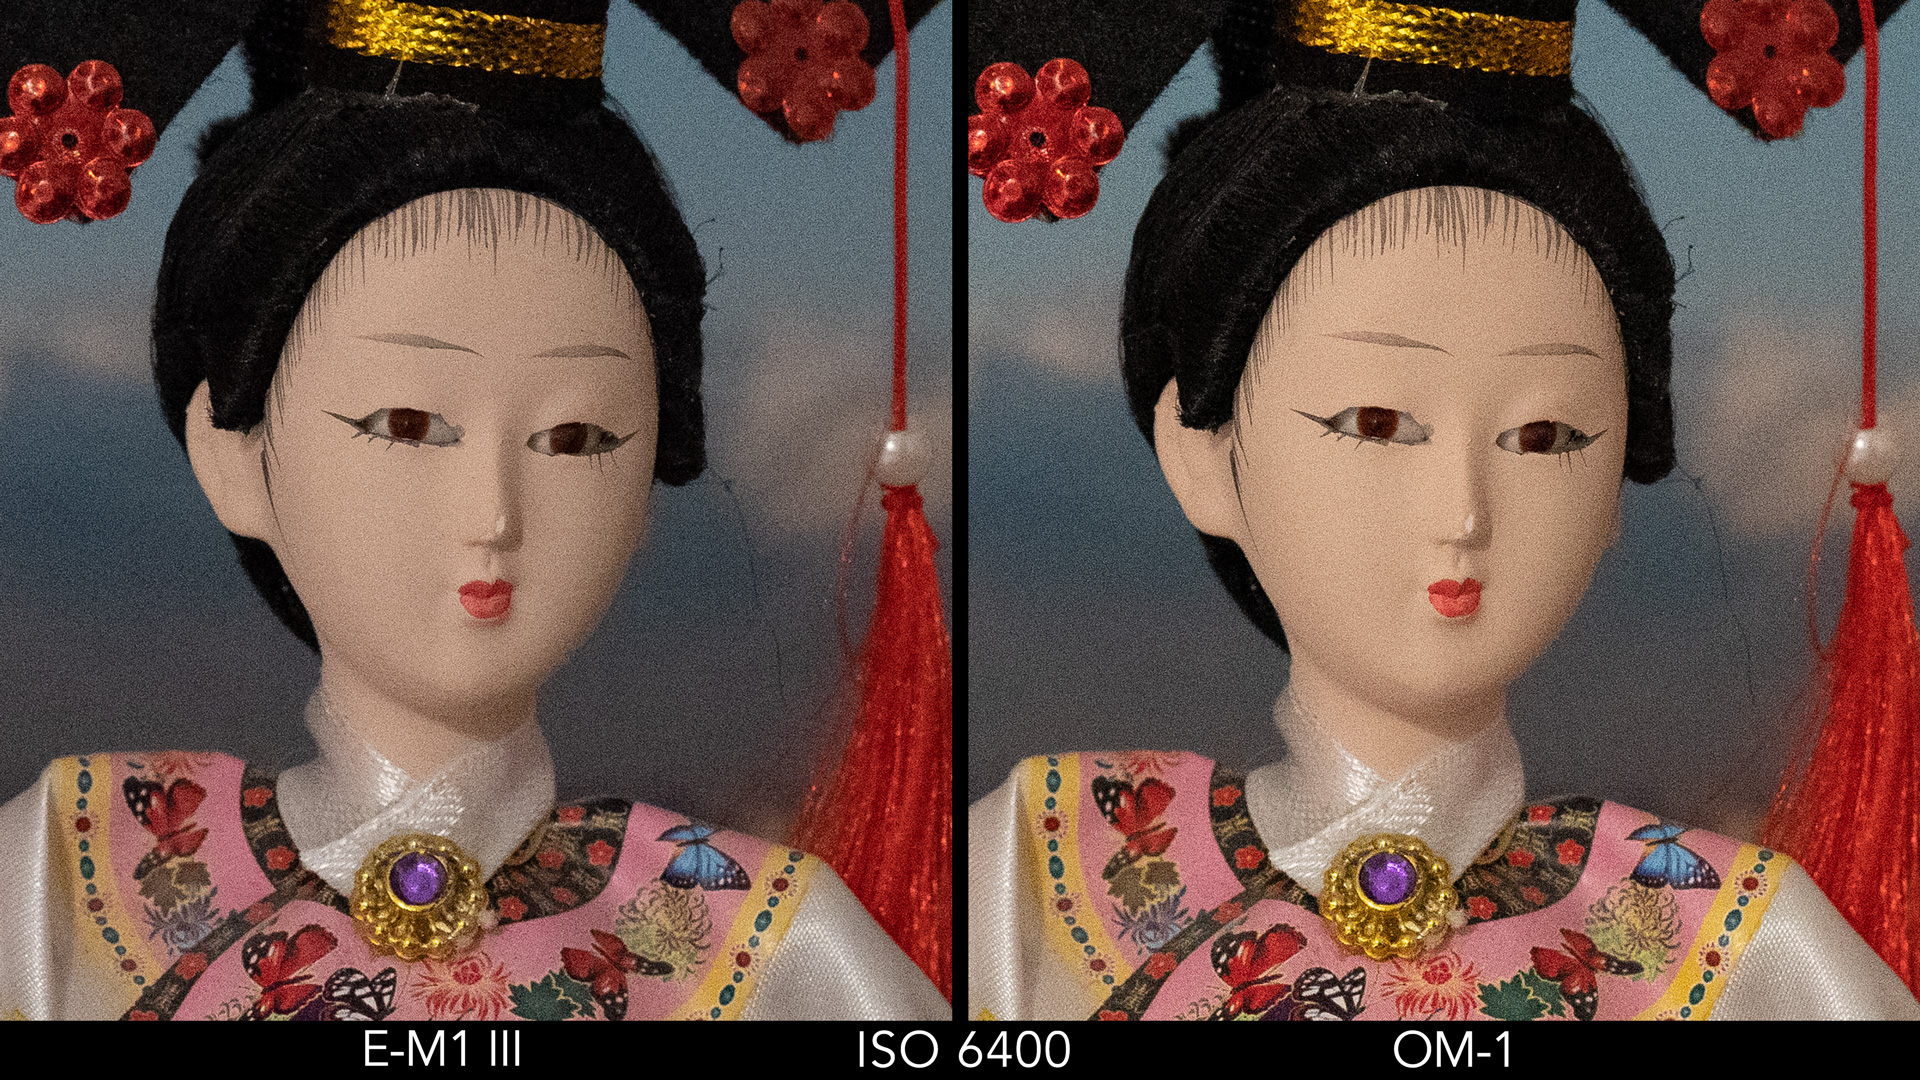 side by side image of a Japanese doll comparing ISO 6400 for the E-M1 III and OM-1